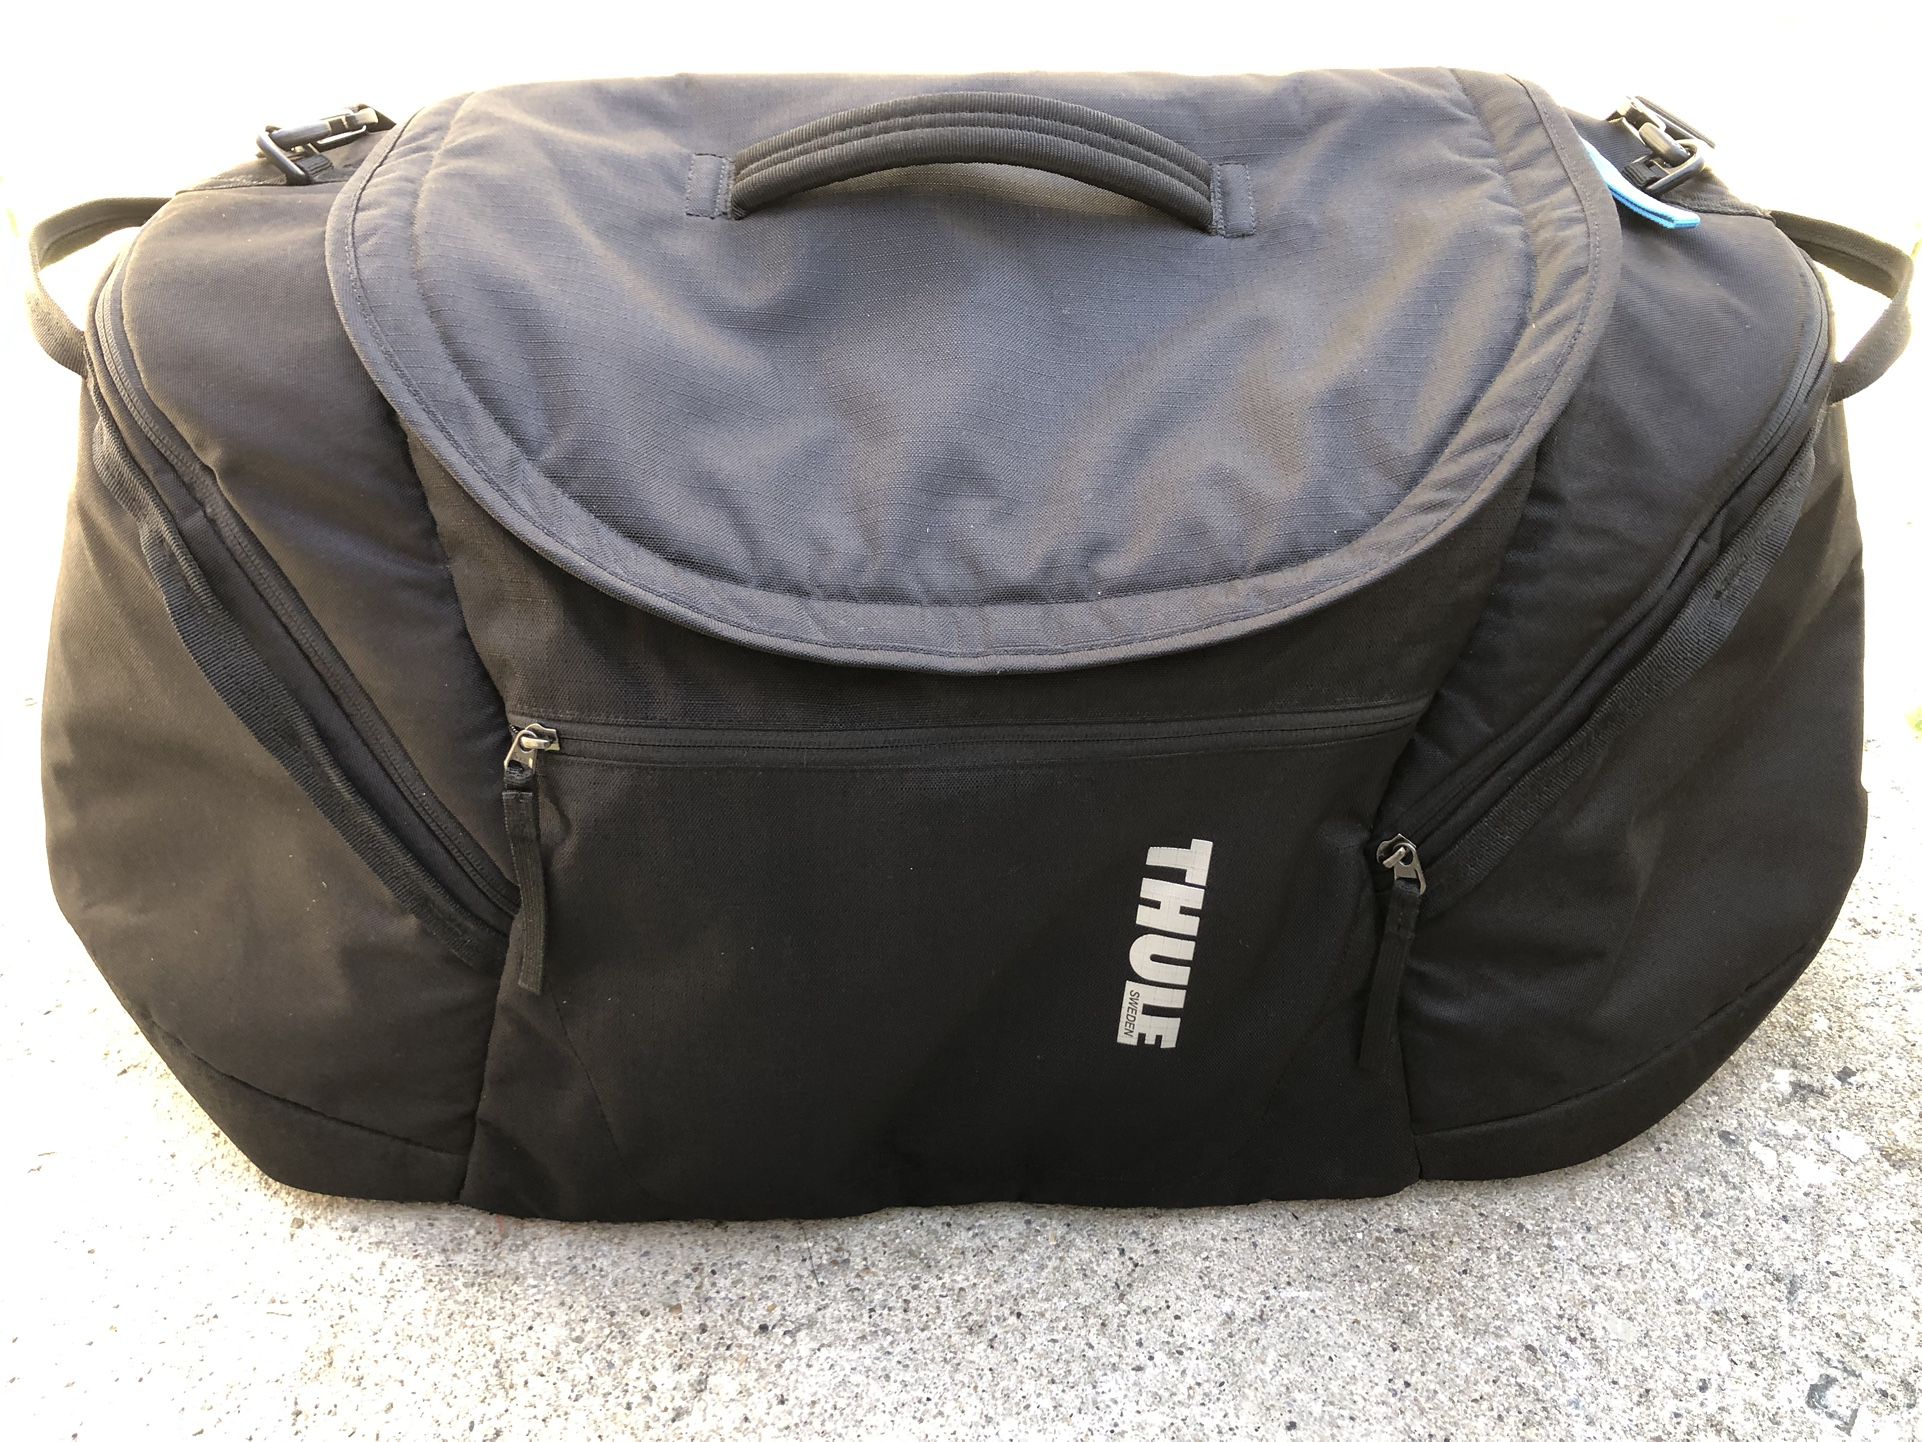 Thule Duffle Bag Good Storage Space For All Different Outdoor Sports . In excellent condition $70 firm